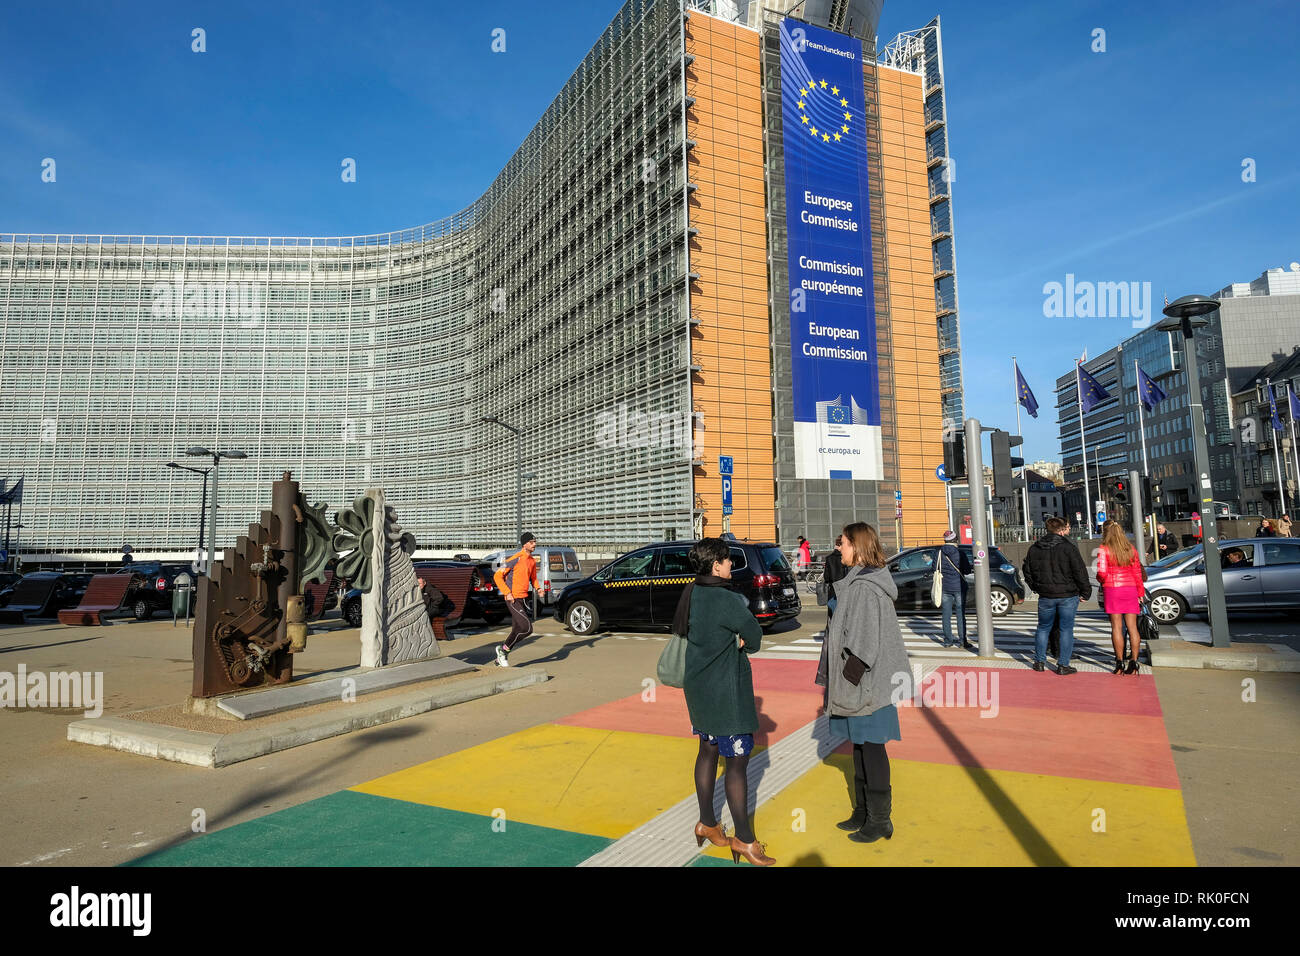 Brussels, Belgium - the building of the European Commission, the Palais Berlaymont, at the Schuman roundabout in Brussels, Brüssel, Belgien - das Geba Stock Photo